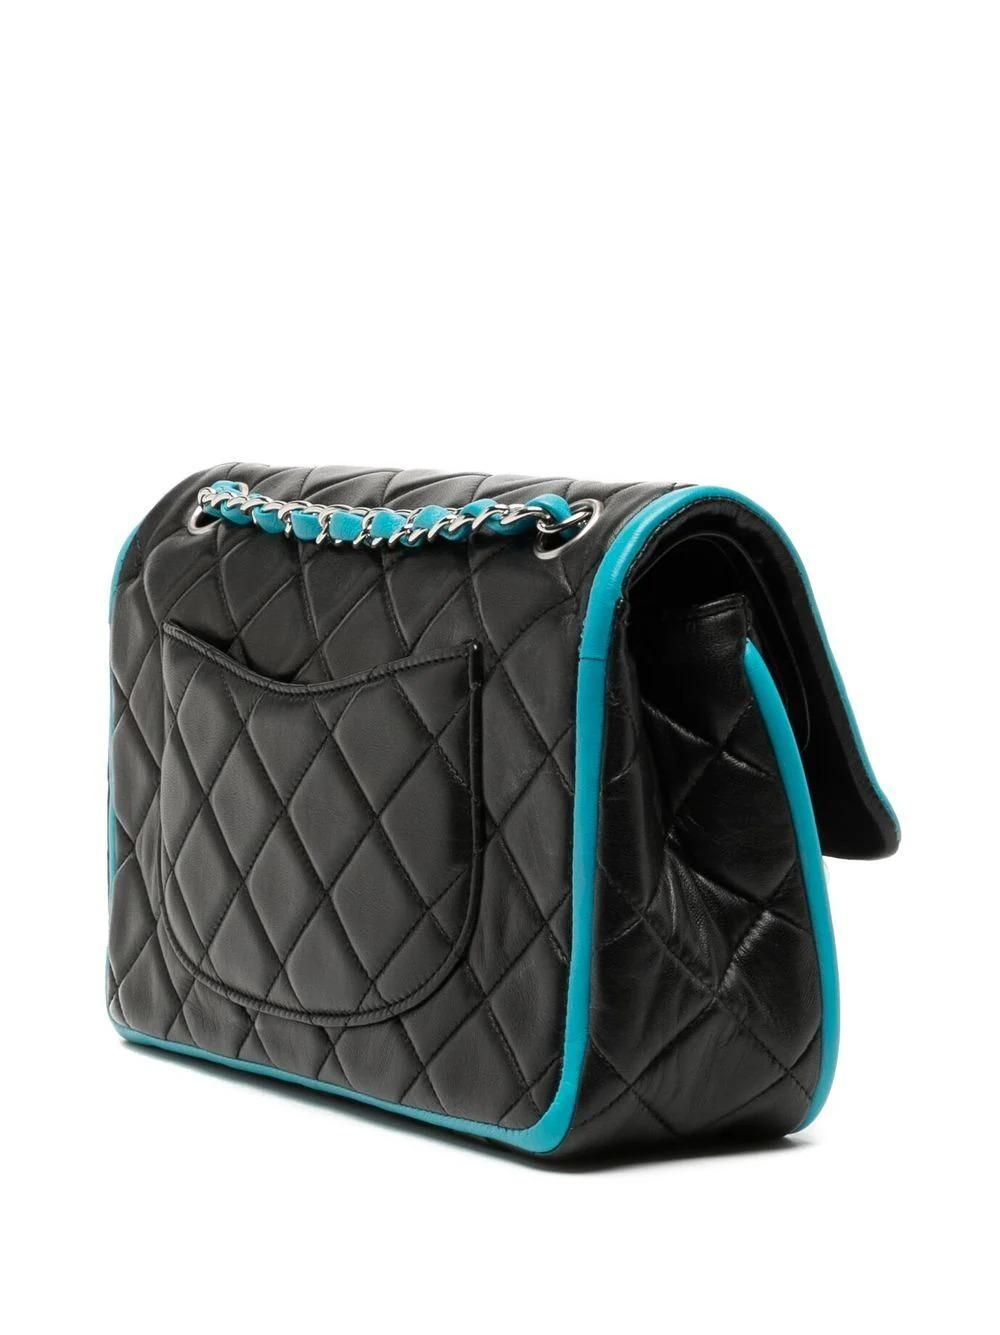 Chanel 2006 Medium Double Classic Flap in Black Lambskin Turquoise Piping Bag For Sale 7